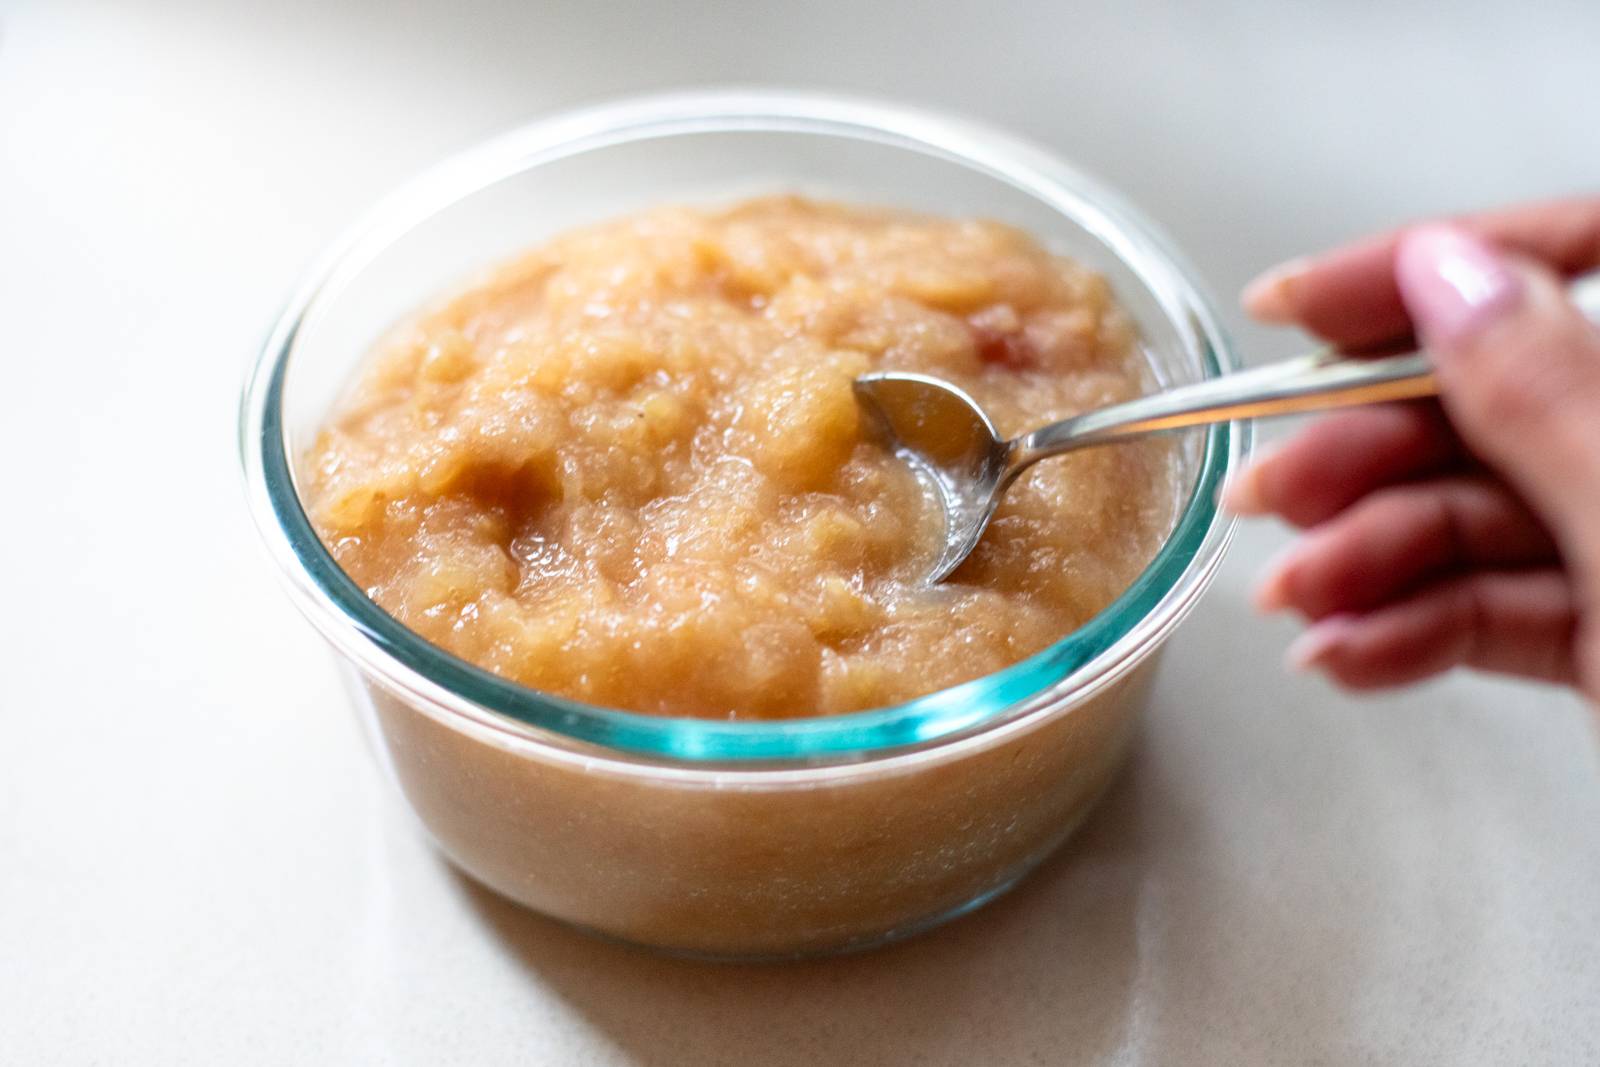 Applesauce in a glass bowl with a spoon.